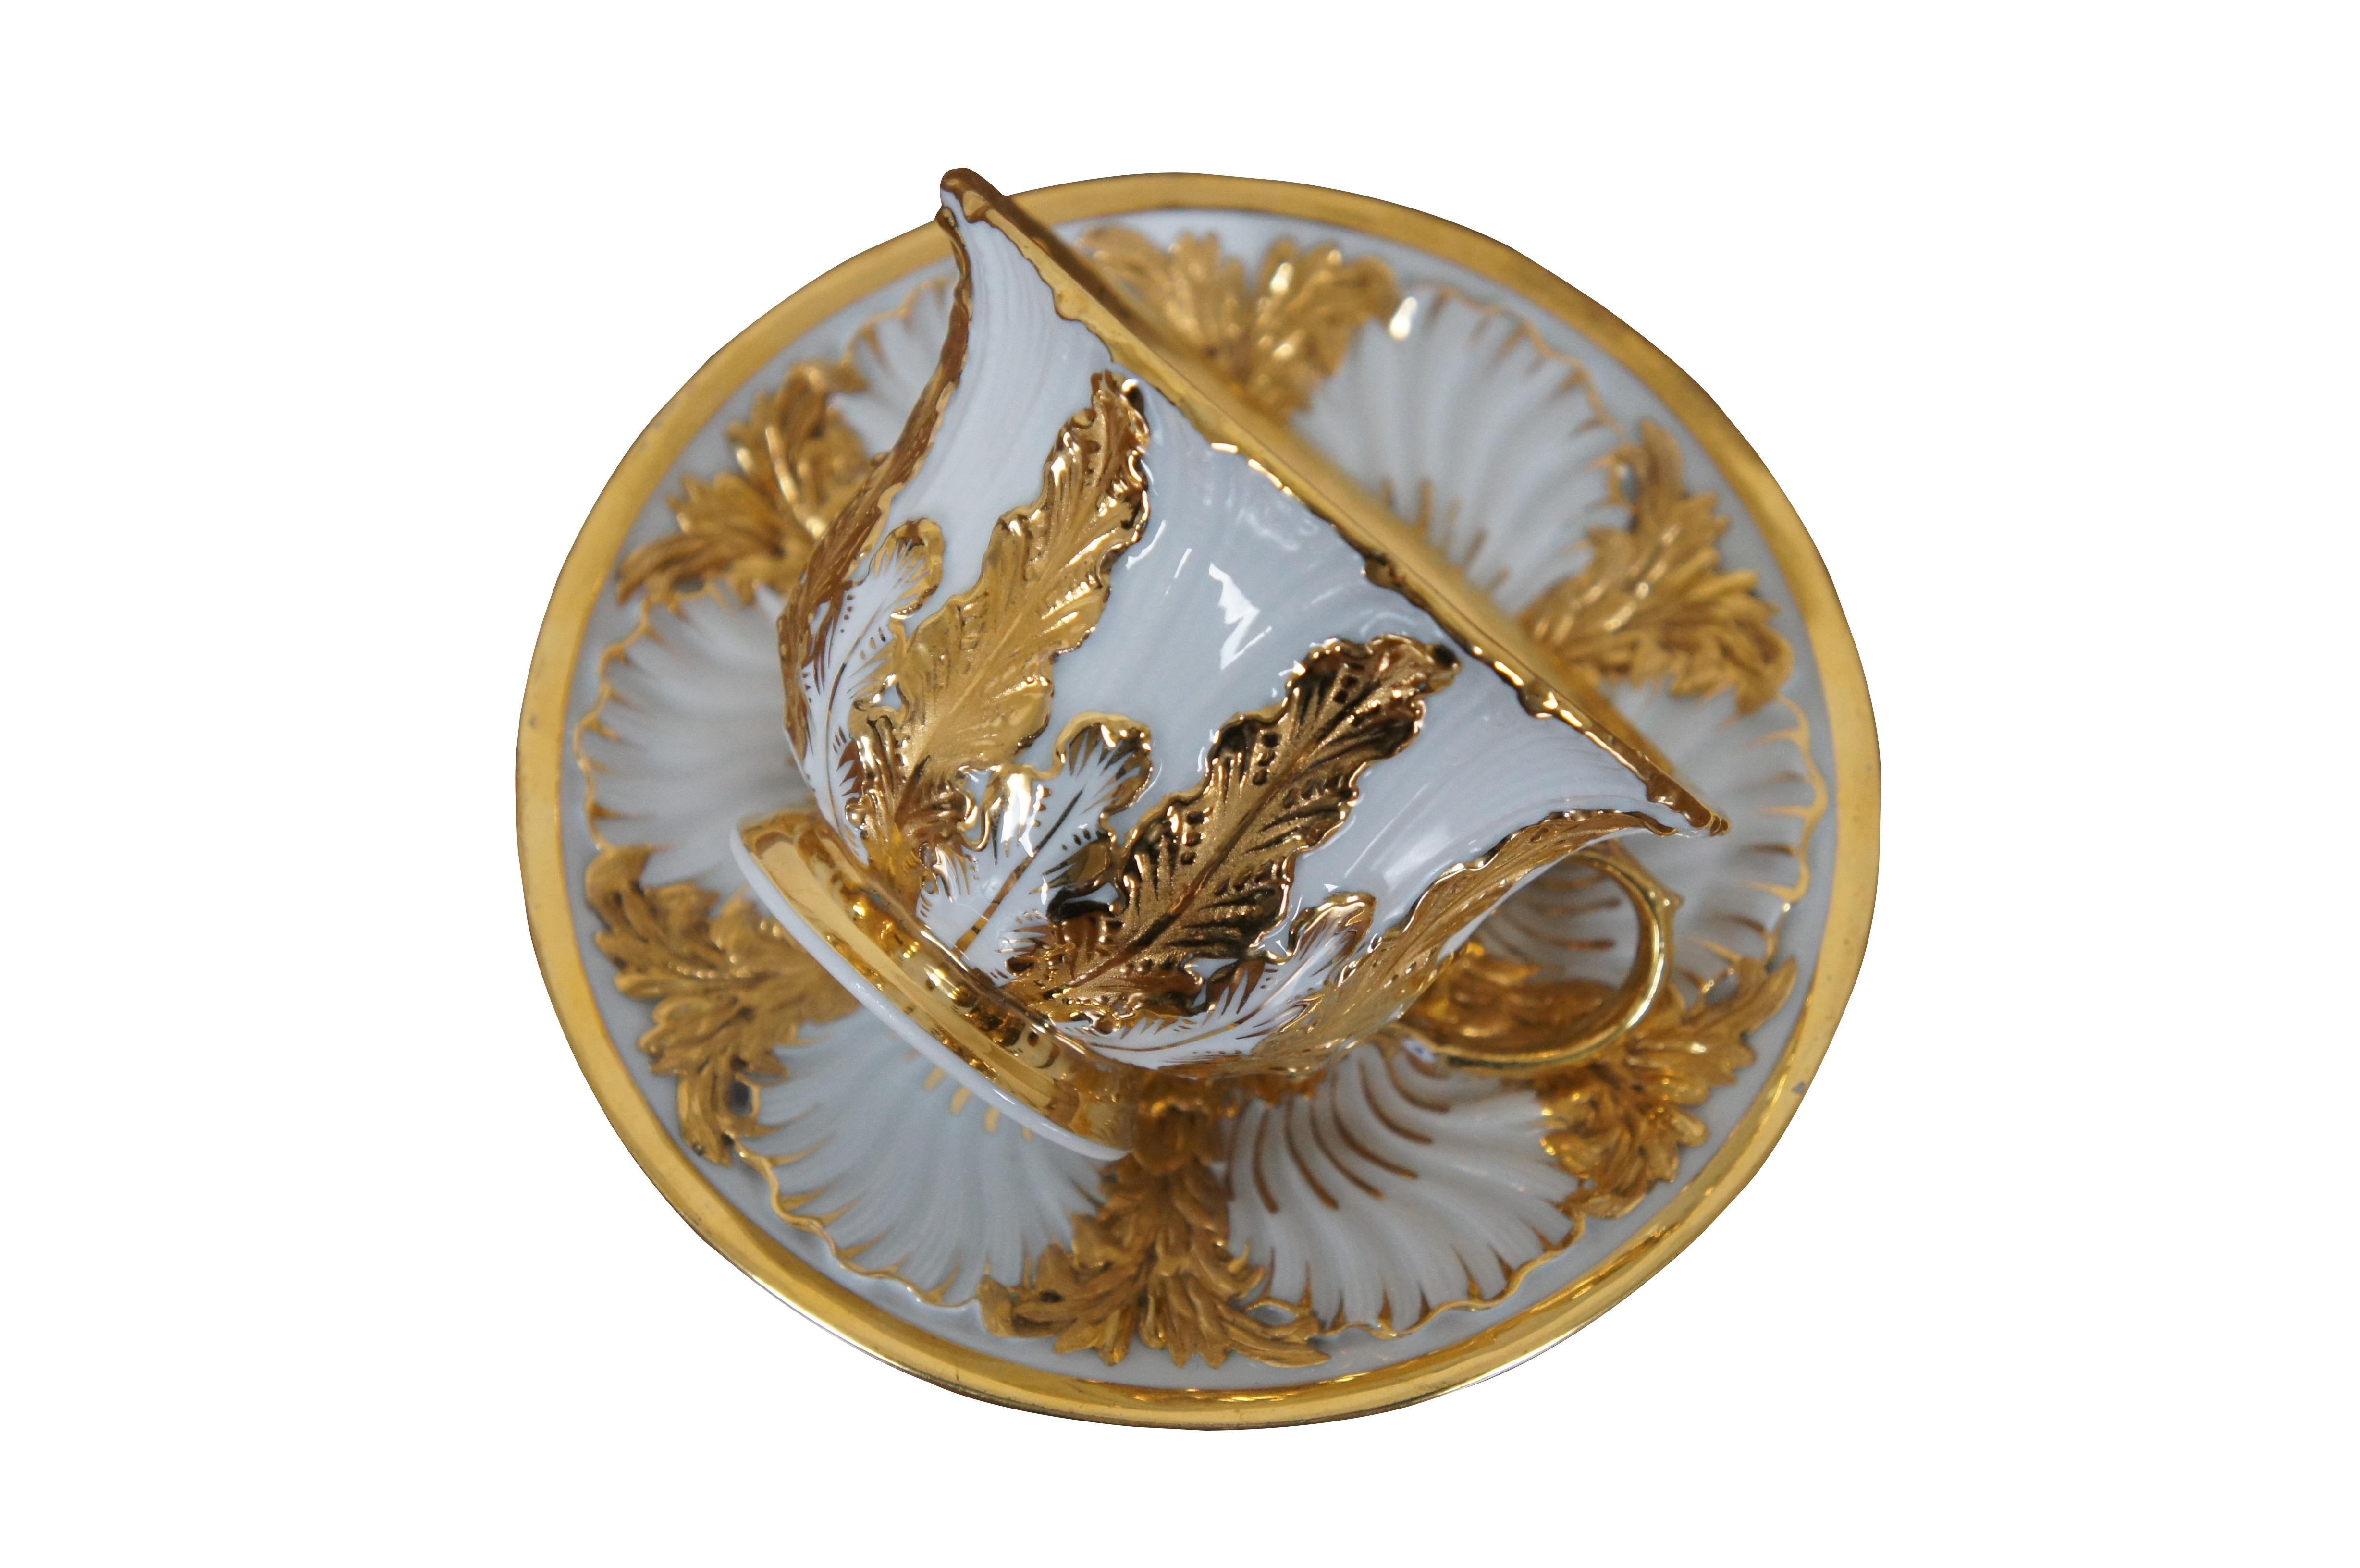 Antique Meissen Acanthus Leaf Mocha Teacup & Saucer 1st Choice White & Gold In Good Condition For Sale In Dayton, OH